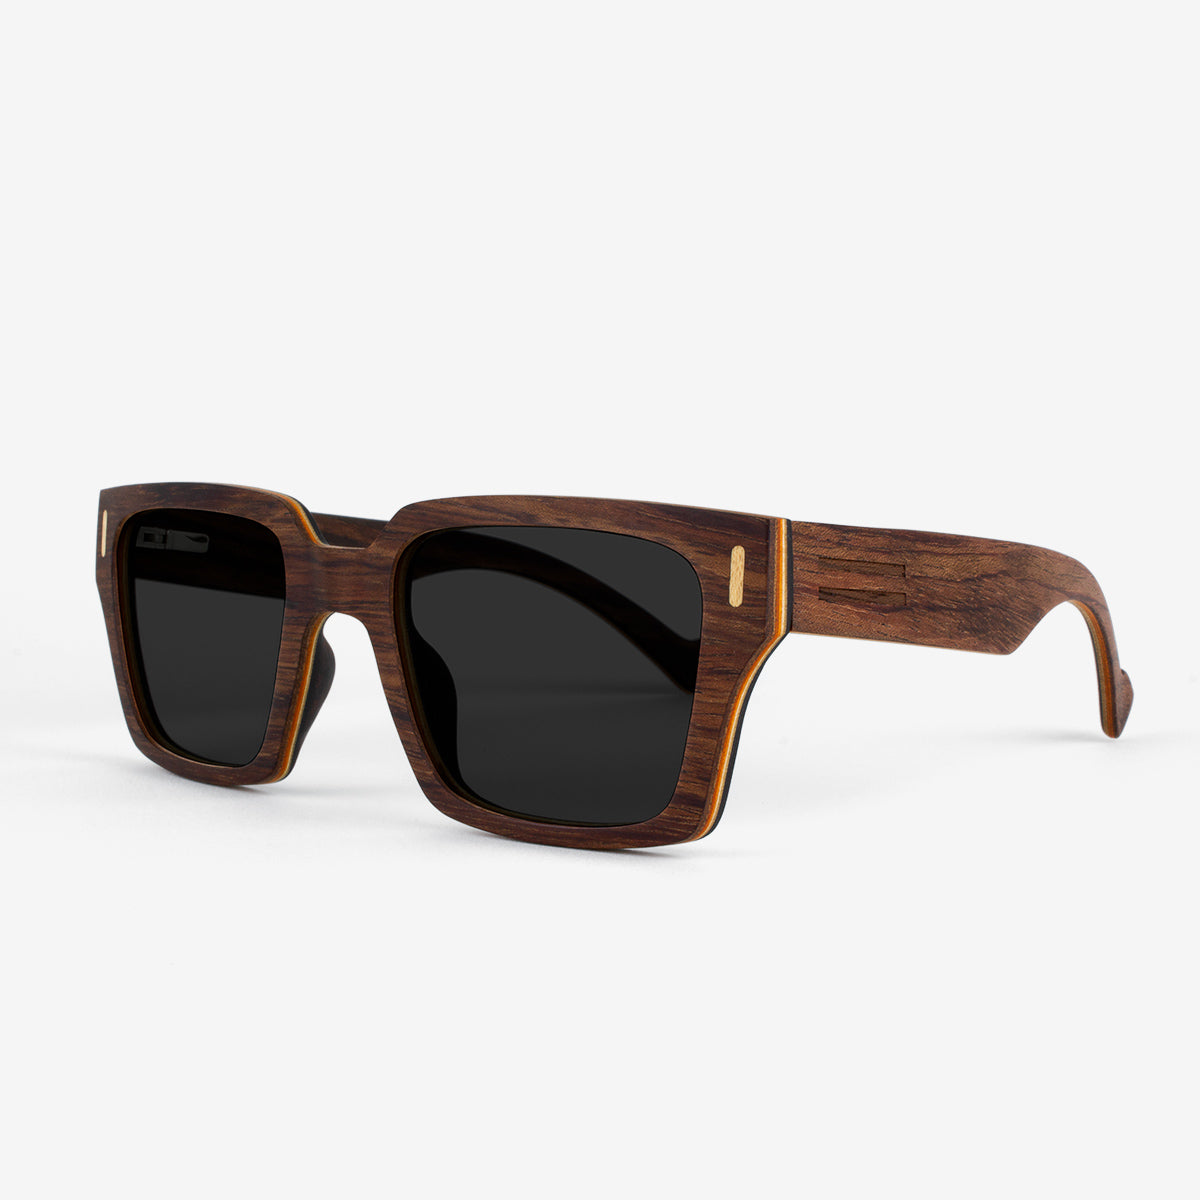 side photo of Rosewood Wooden sunglasses with orange racer stripe